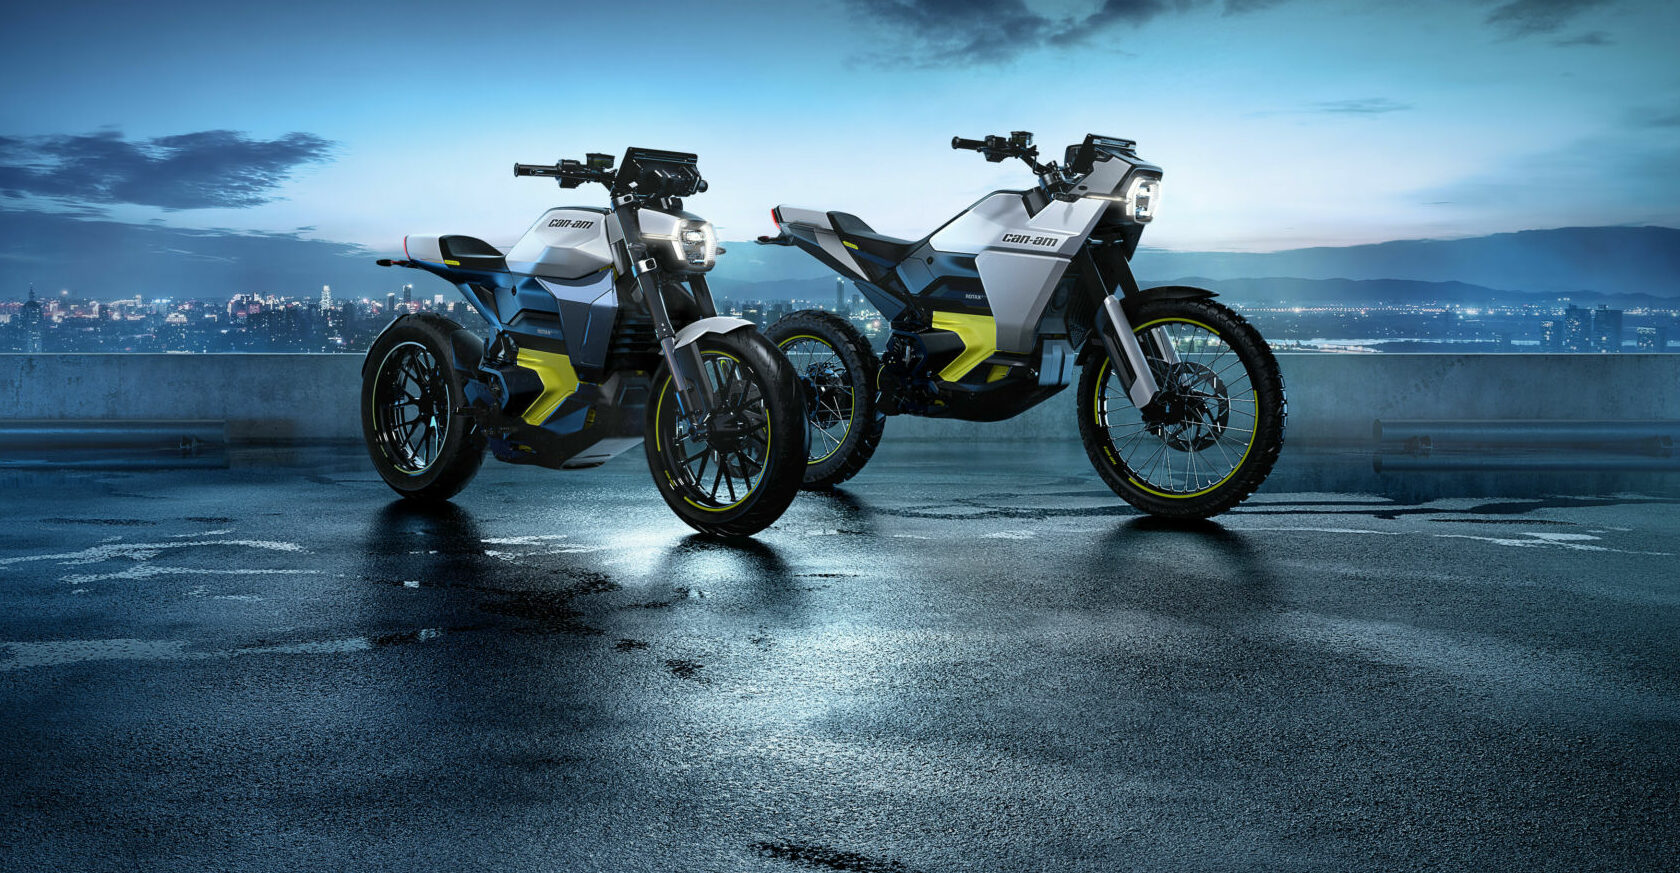 The all-electric Pulse roadster and Origin adventure motorcycles will mark Can-Am's return to the two-wheel market in 2024. Photos courtesy BRP.